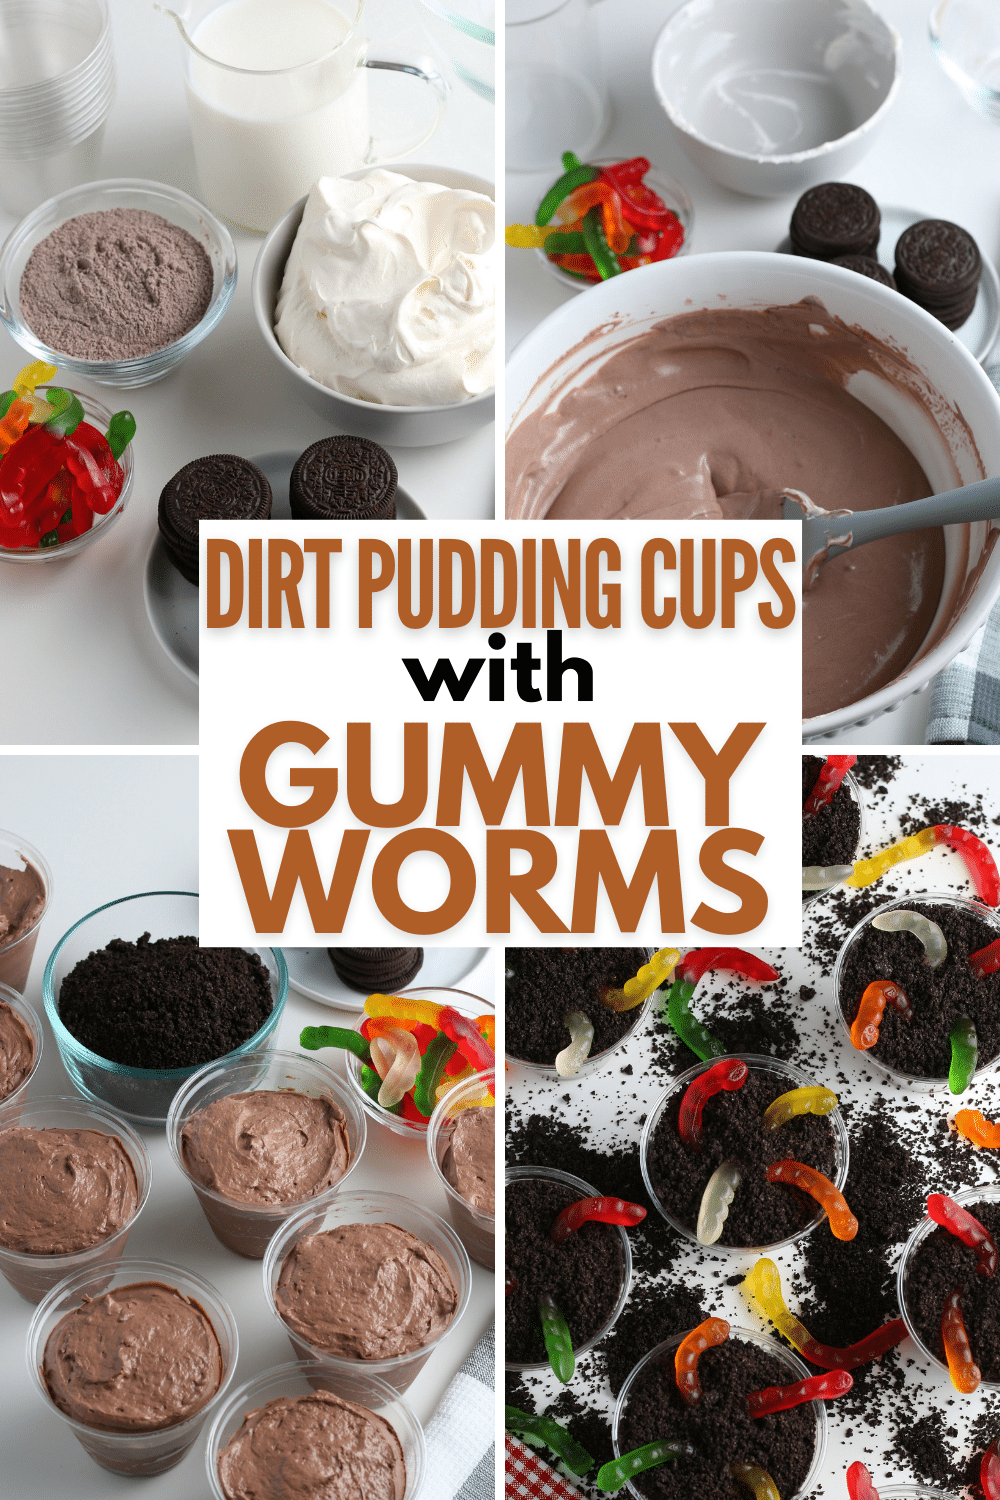 Dirt Pudding Cups with Gummy Worms are a fun snack for children and easy enough that they can help you make the treats. #puddingcups #dirtpudding #snacks via @wondermomwannab